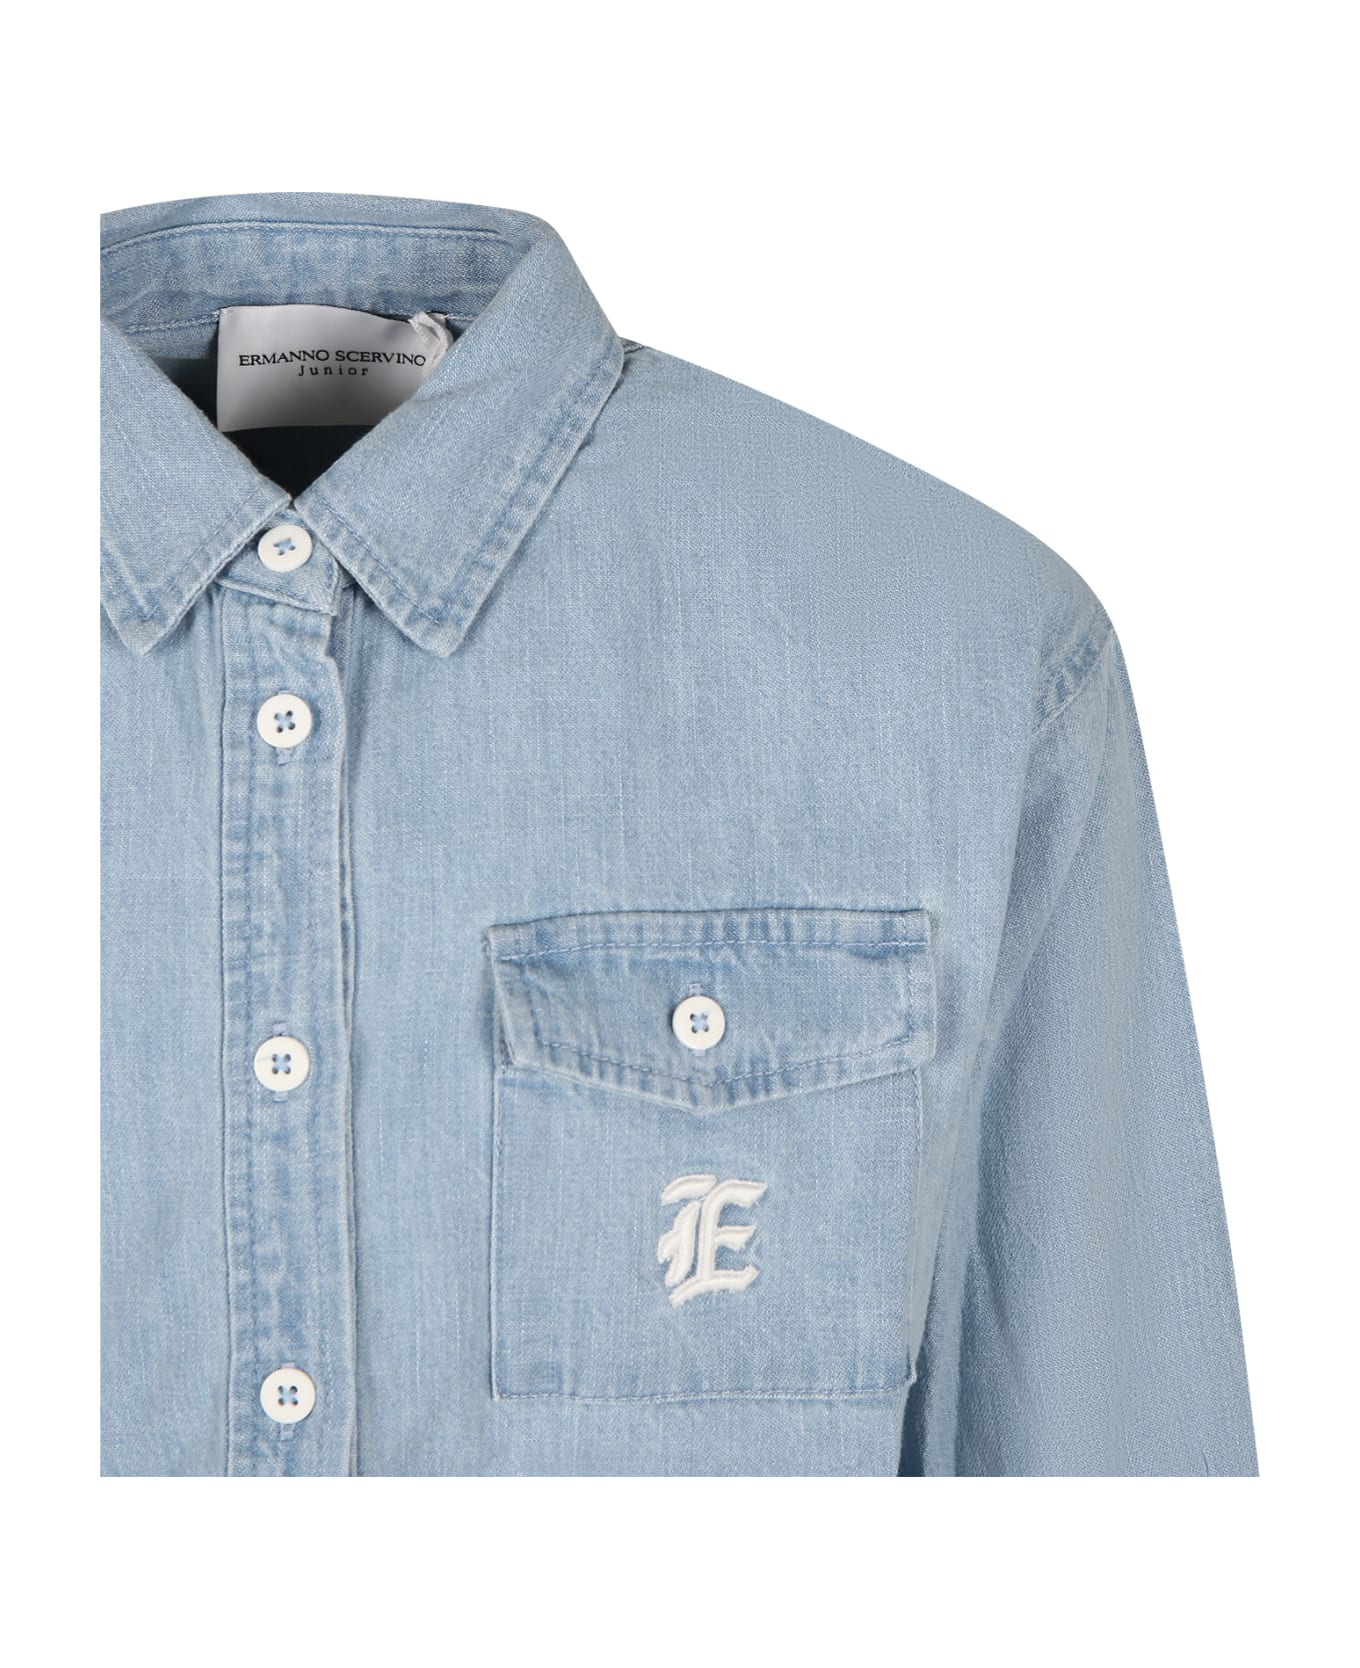 Ermanno Scervino Junior Blue Shirt For Girl With Embroidery And Logo - Denim シャツ